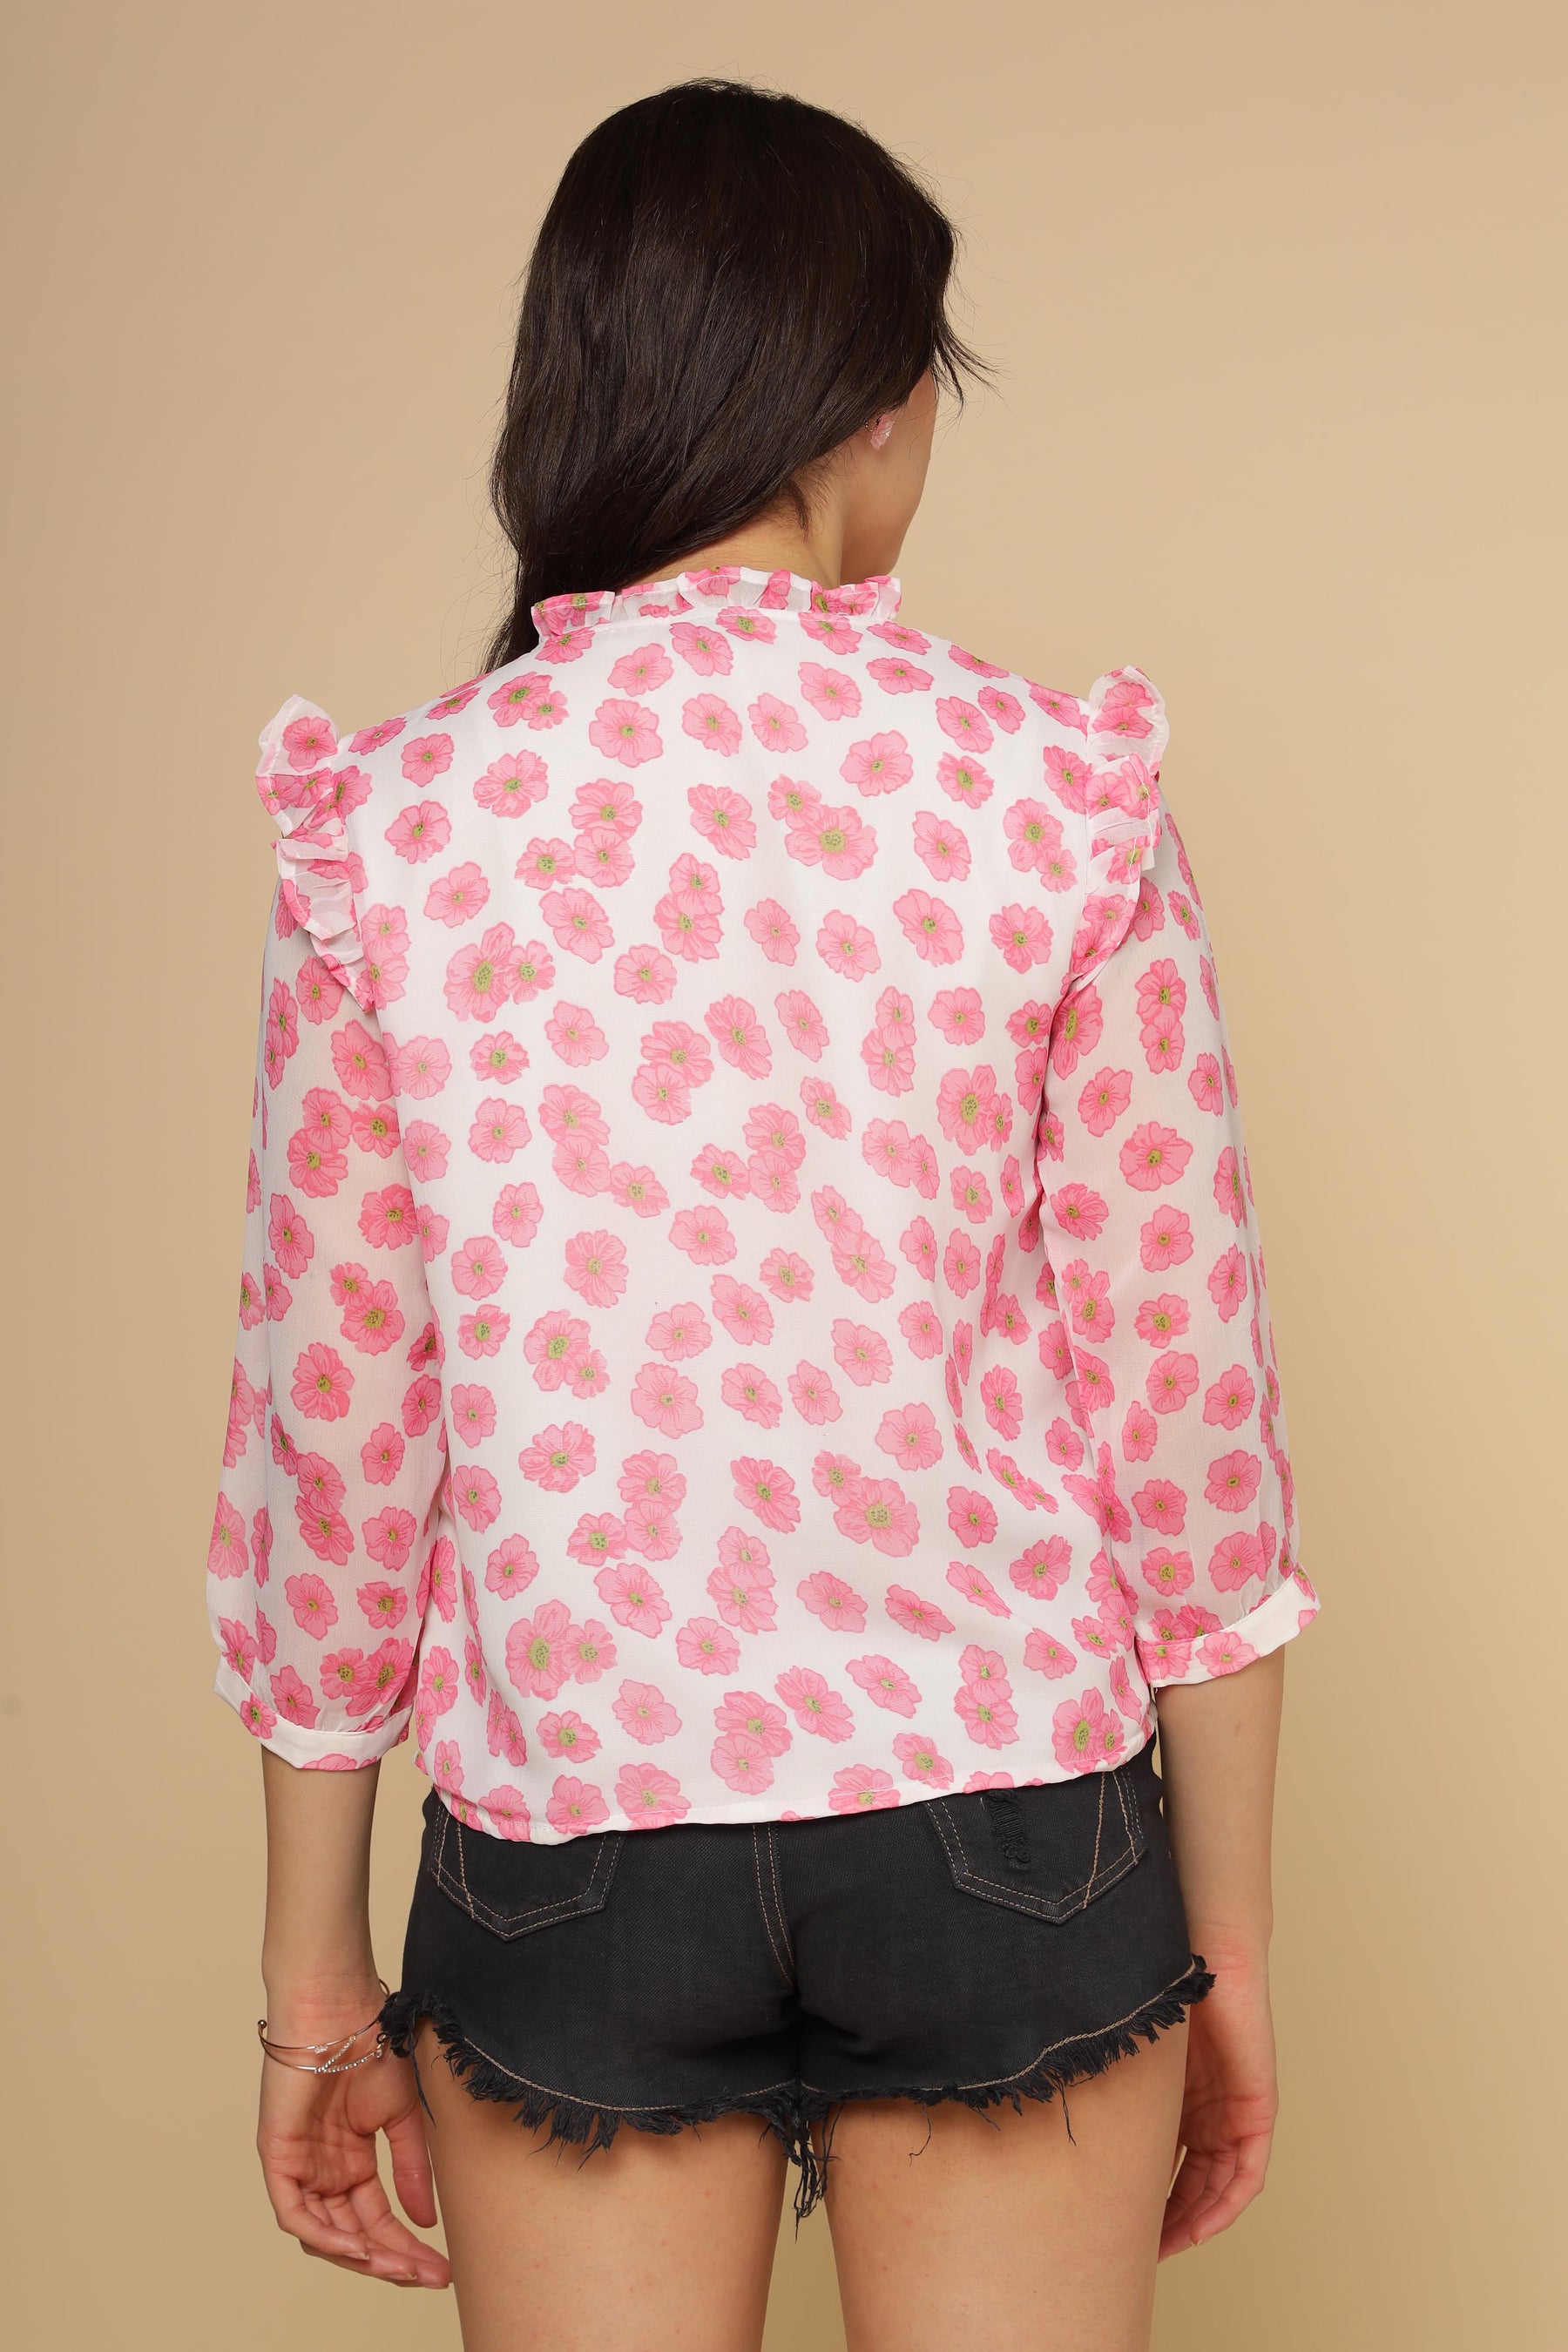 PINK RUFFLE FLORAL TOP